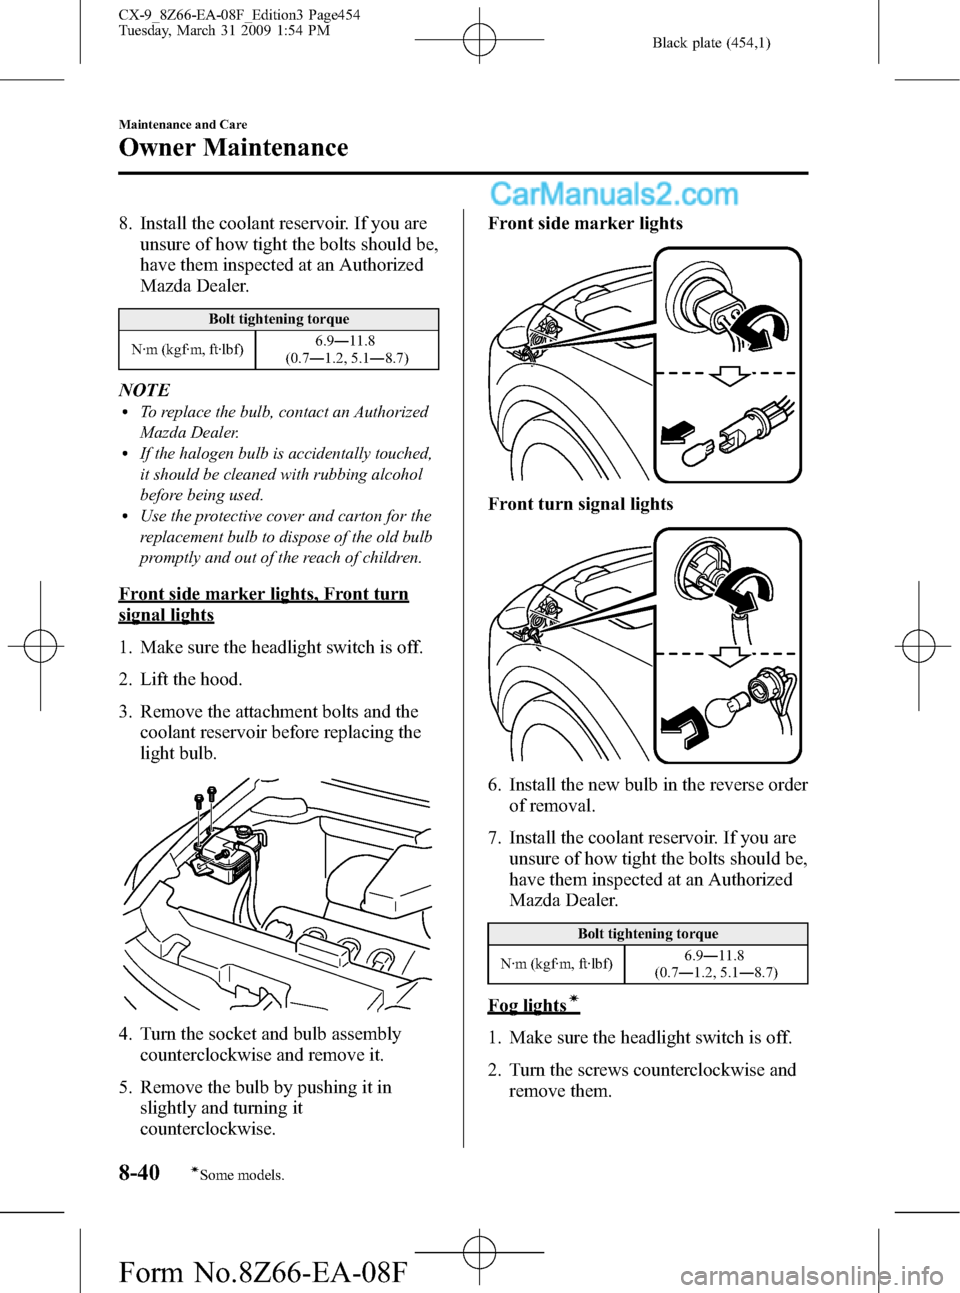 MAZDA MODEL CX-9 2009  Owners Manual (in English) Black plate (454,1)
8. Install the coolant reservoir. If you are
unsure of how tight the bolts should be,
have them inspected at an Authorized
Mazda Dealer.
Bolt tightening torque
N·m (kgf·m, ft·lb